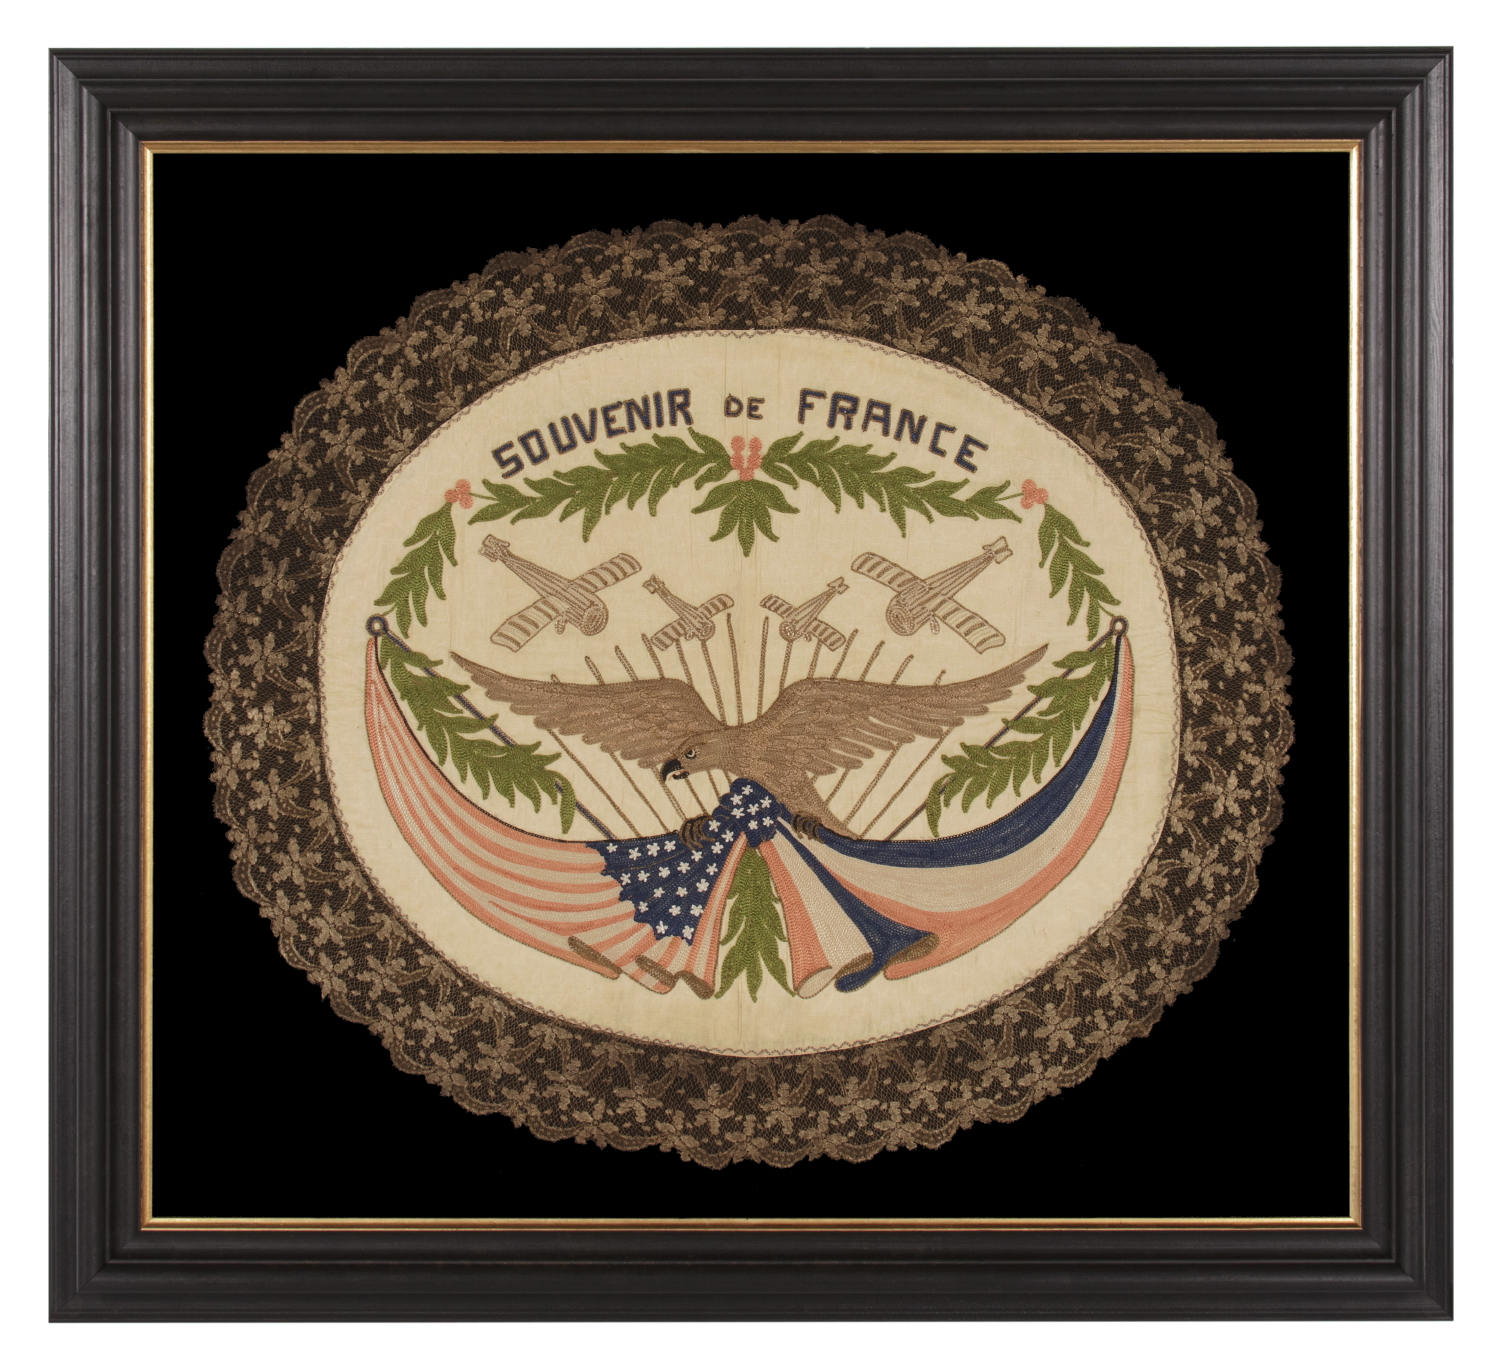 FRANCO-AMERICAN TEXTILE WITH THE IMAGE OF AN EAGLE SUPPORTING KNOTTED & DRAPED AMERICAN AND FRENCH FLAGS BENEATH FOUR WAR PLANES; RENDERED IN EMBROIDERED SILK FLOSS AND METALLIC BULLION ON SILK, MADE TO CELEBRATE THE END OF WWI